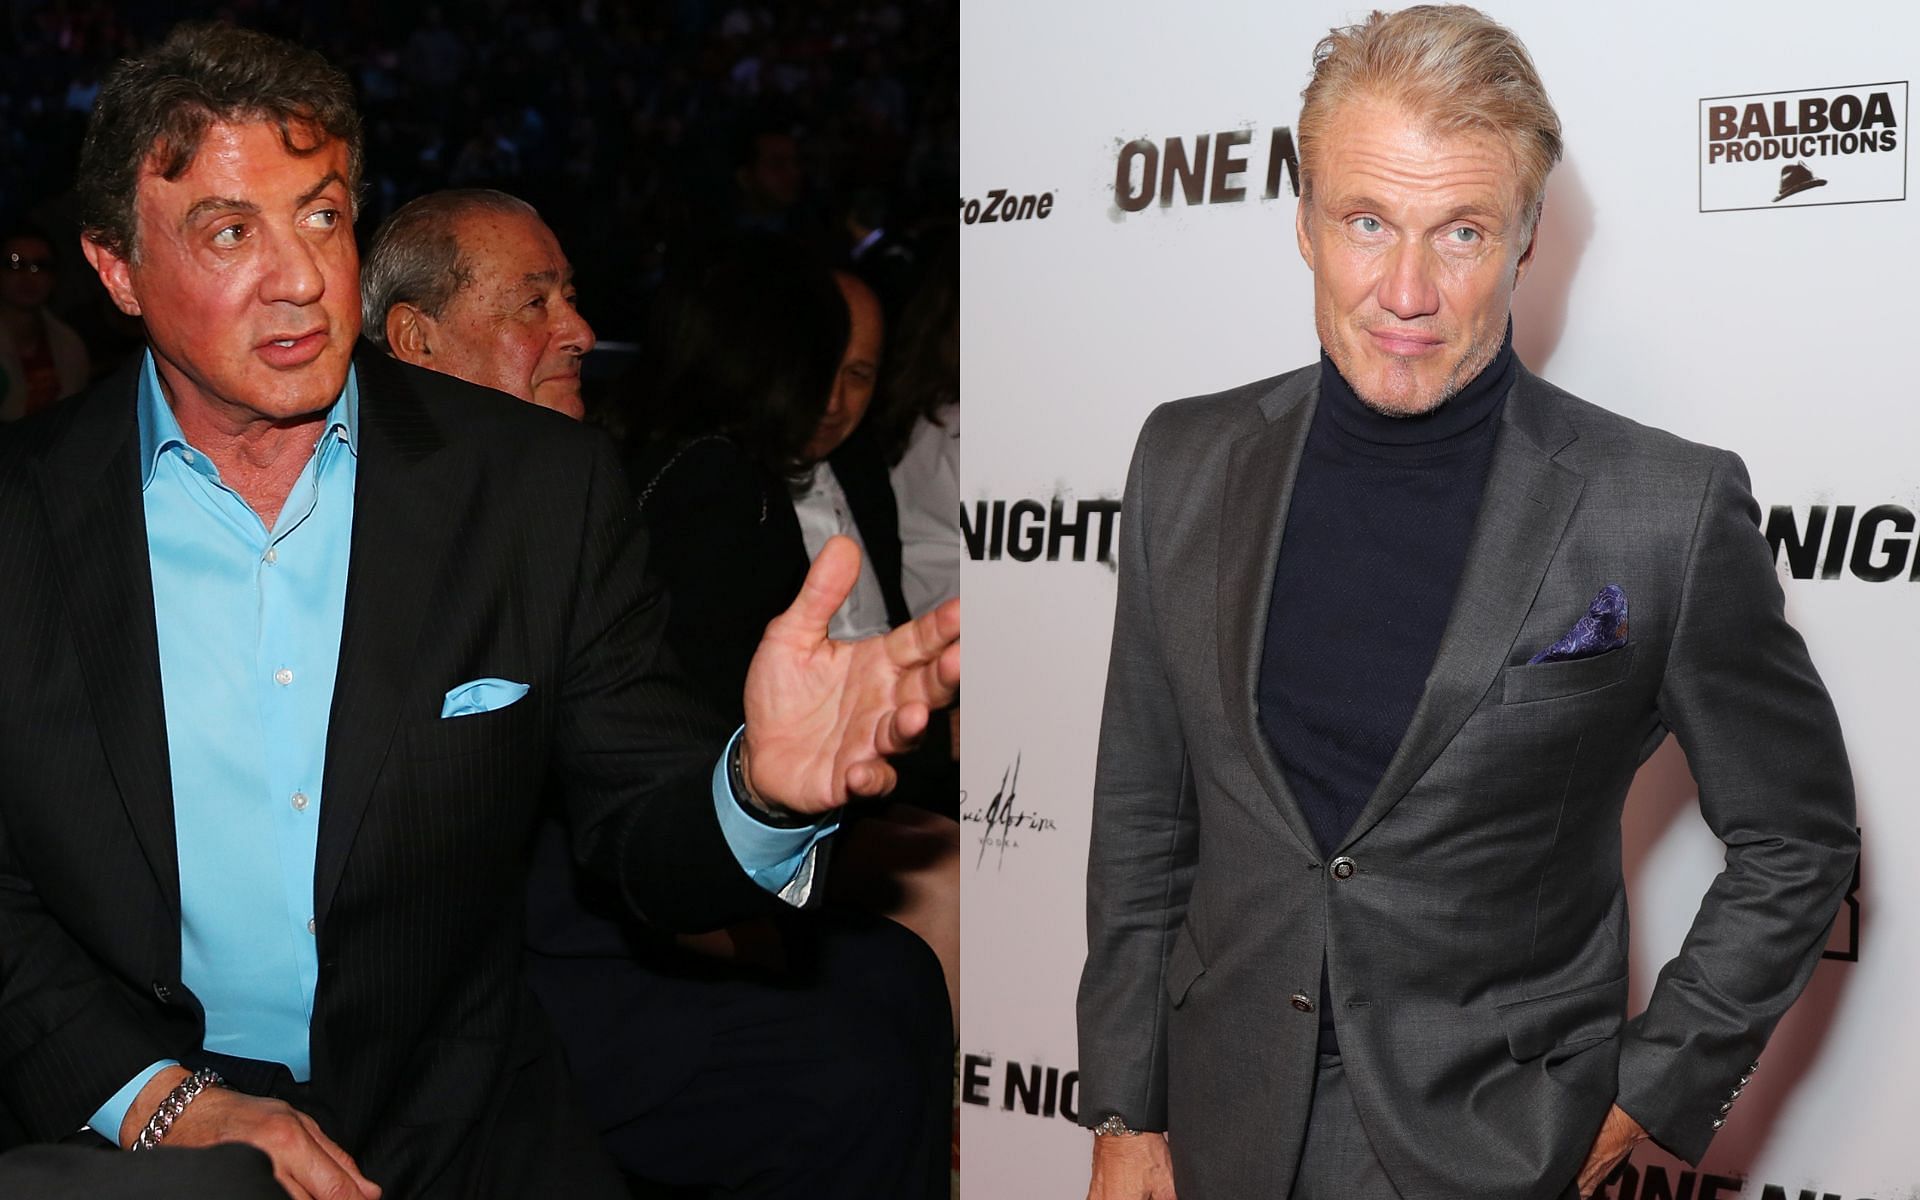 Sylvester Stallone (left) and Dolph Lundgren (right) (Image credits Getty Images)